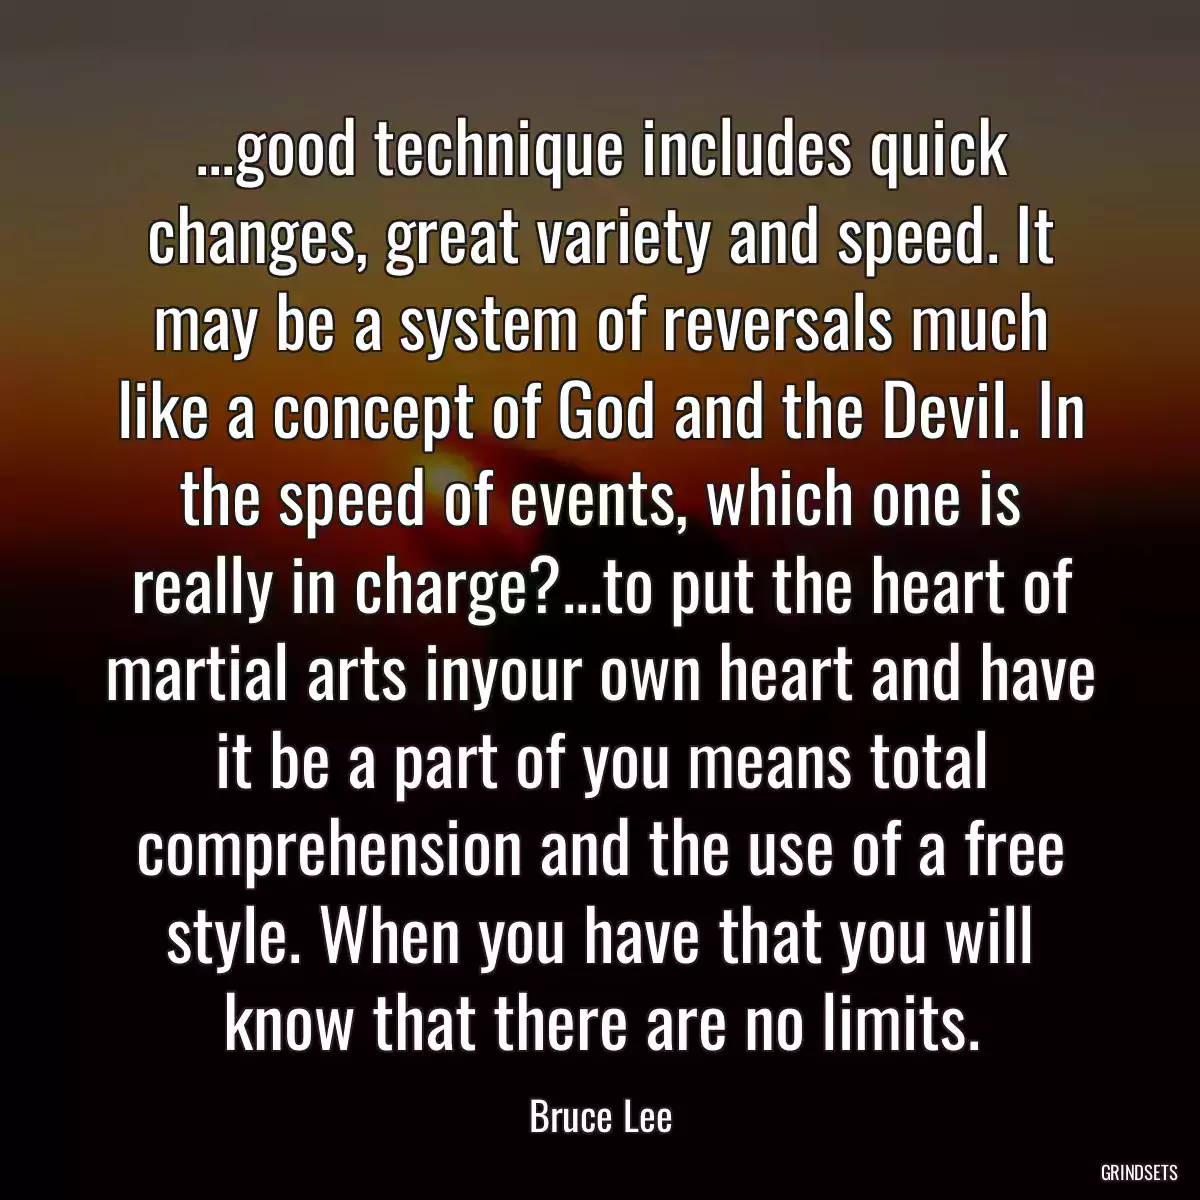 ...good technique includes quick changes, great variety and speed. It may be a system of reversals much like a concept of God and the Devil. In the speed of events, which one is really in charge?...to put the heart of martial arts inyour own heart and have it be a part of you means total comprehension and the use of a free style. When you have that you will know that there are no limits.